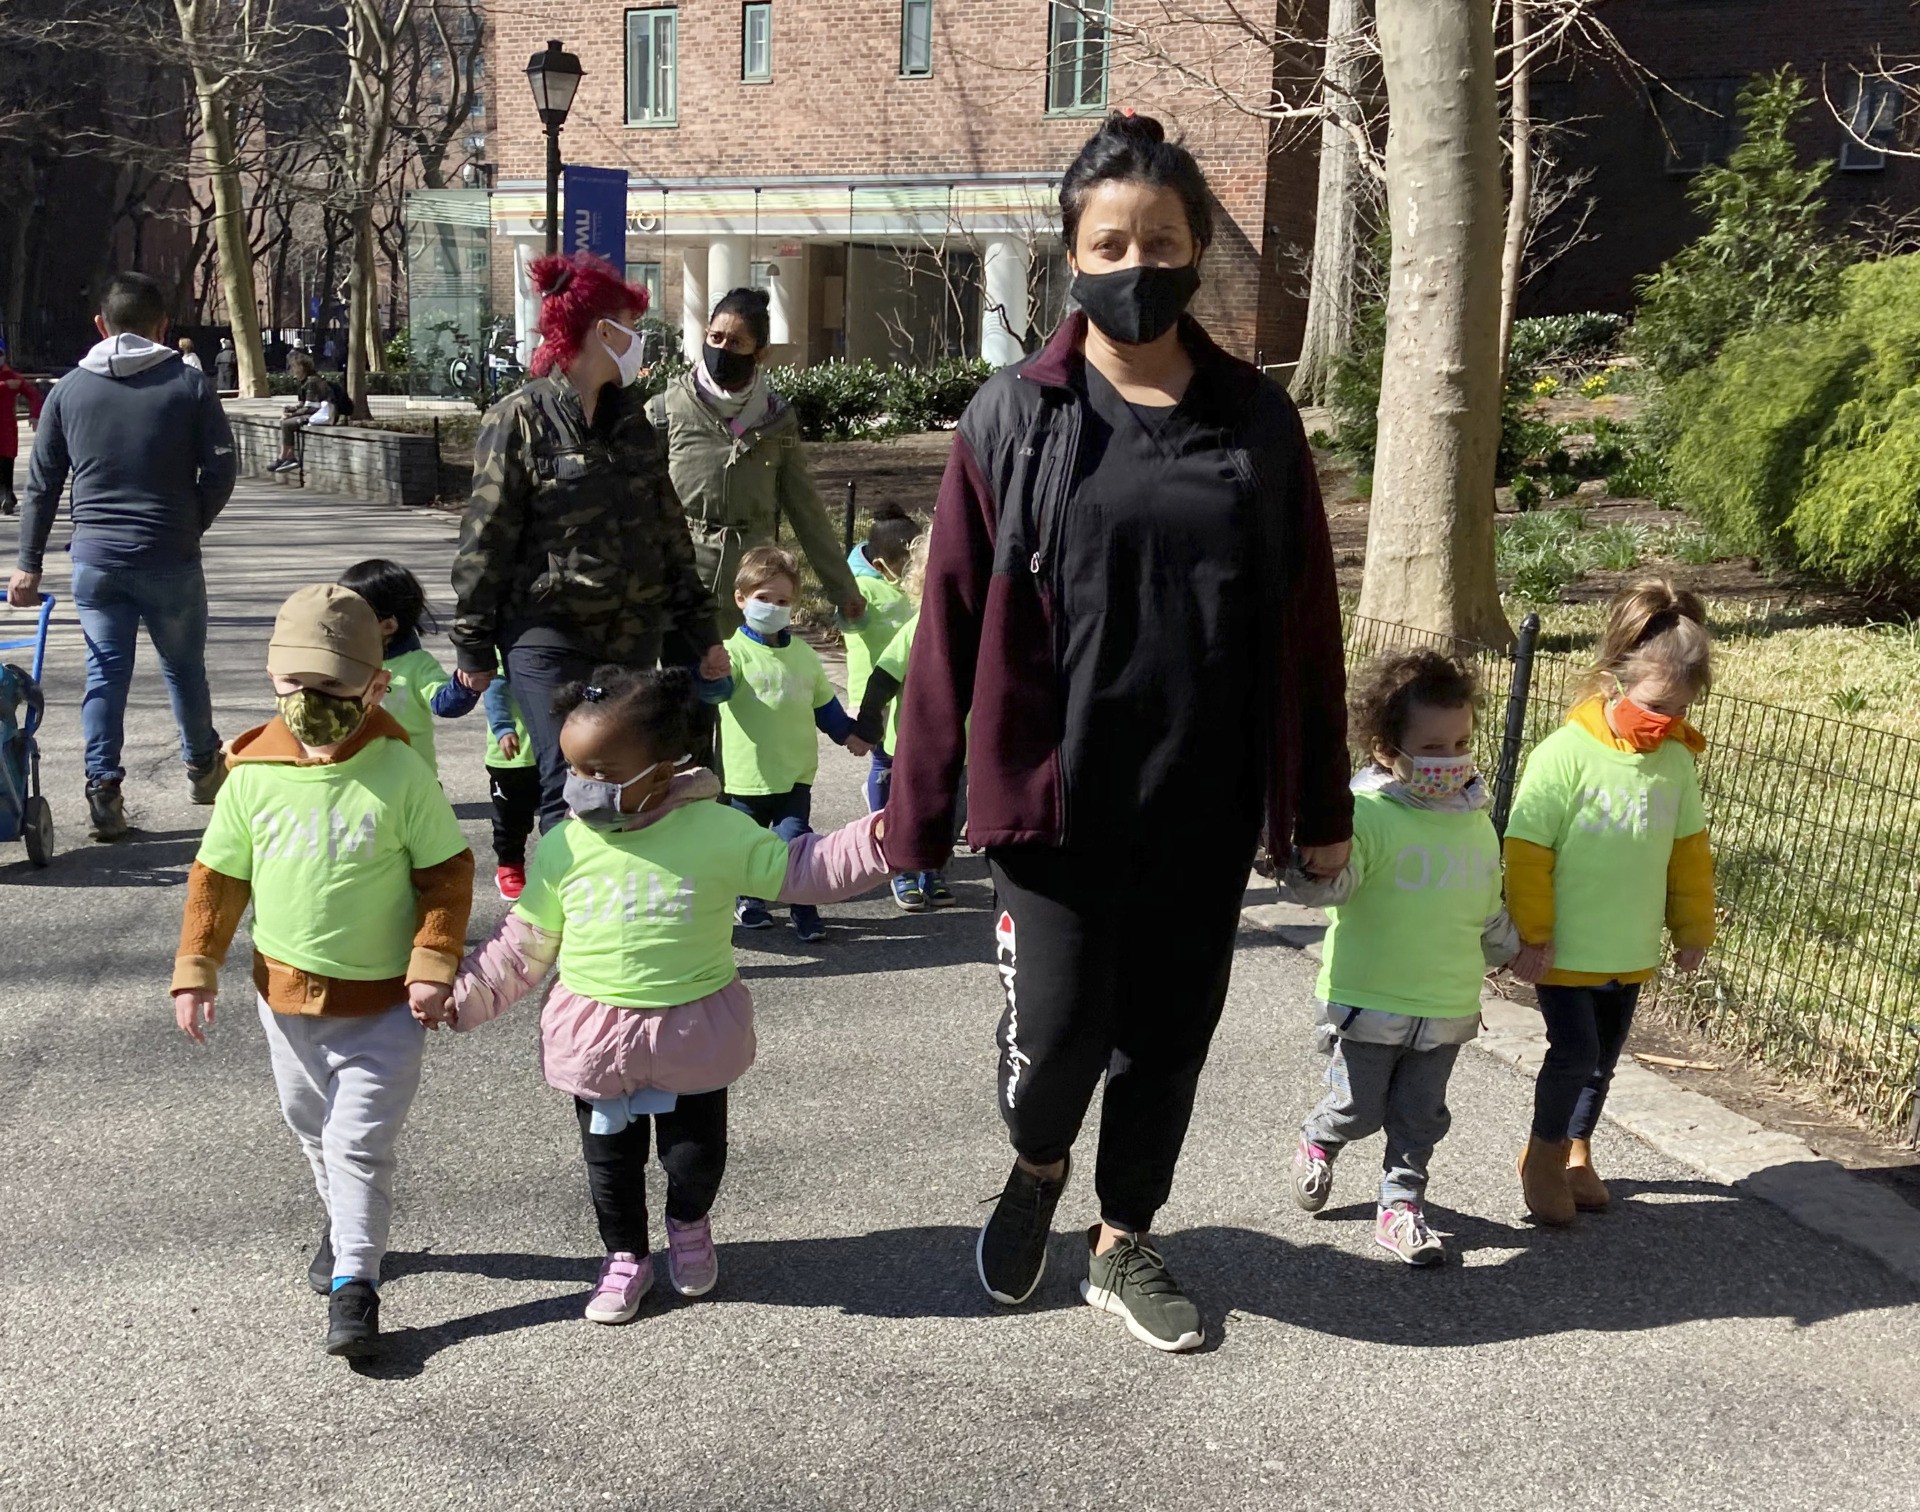 Photo by: STRF/STAR MAX/IPx 2021 7/9/21 CDC wants to open schools this fall, but wants unvaccinated students to wear masks. STAR MAX File Photo: 3/30/21 Children enjoy the spring weather in Manhattan during the Coronavirus pandemic.